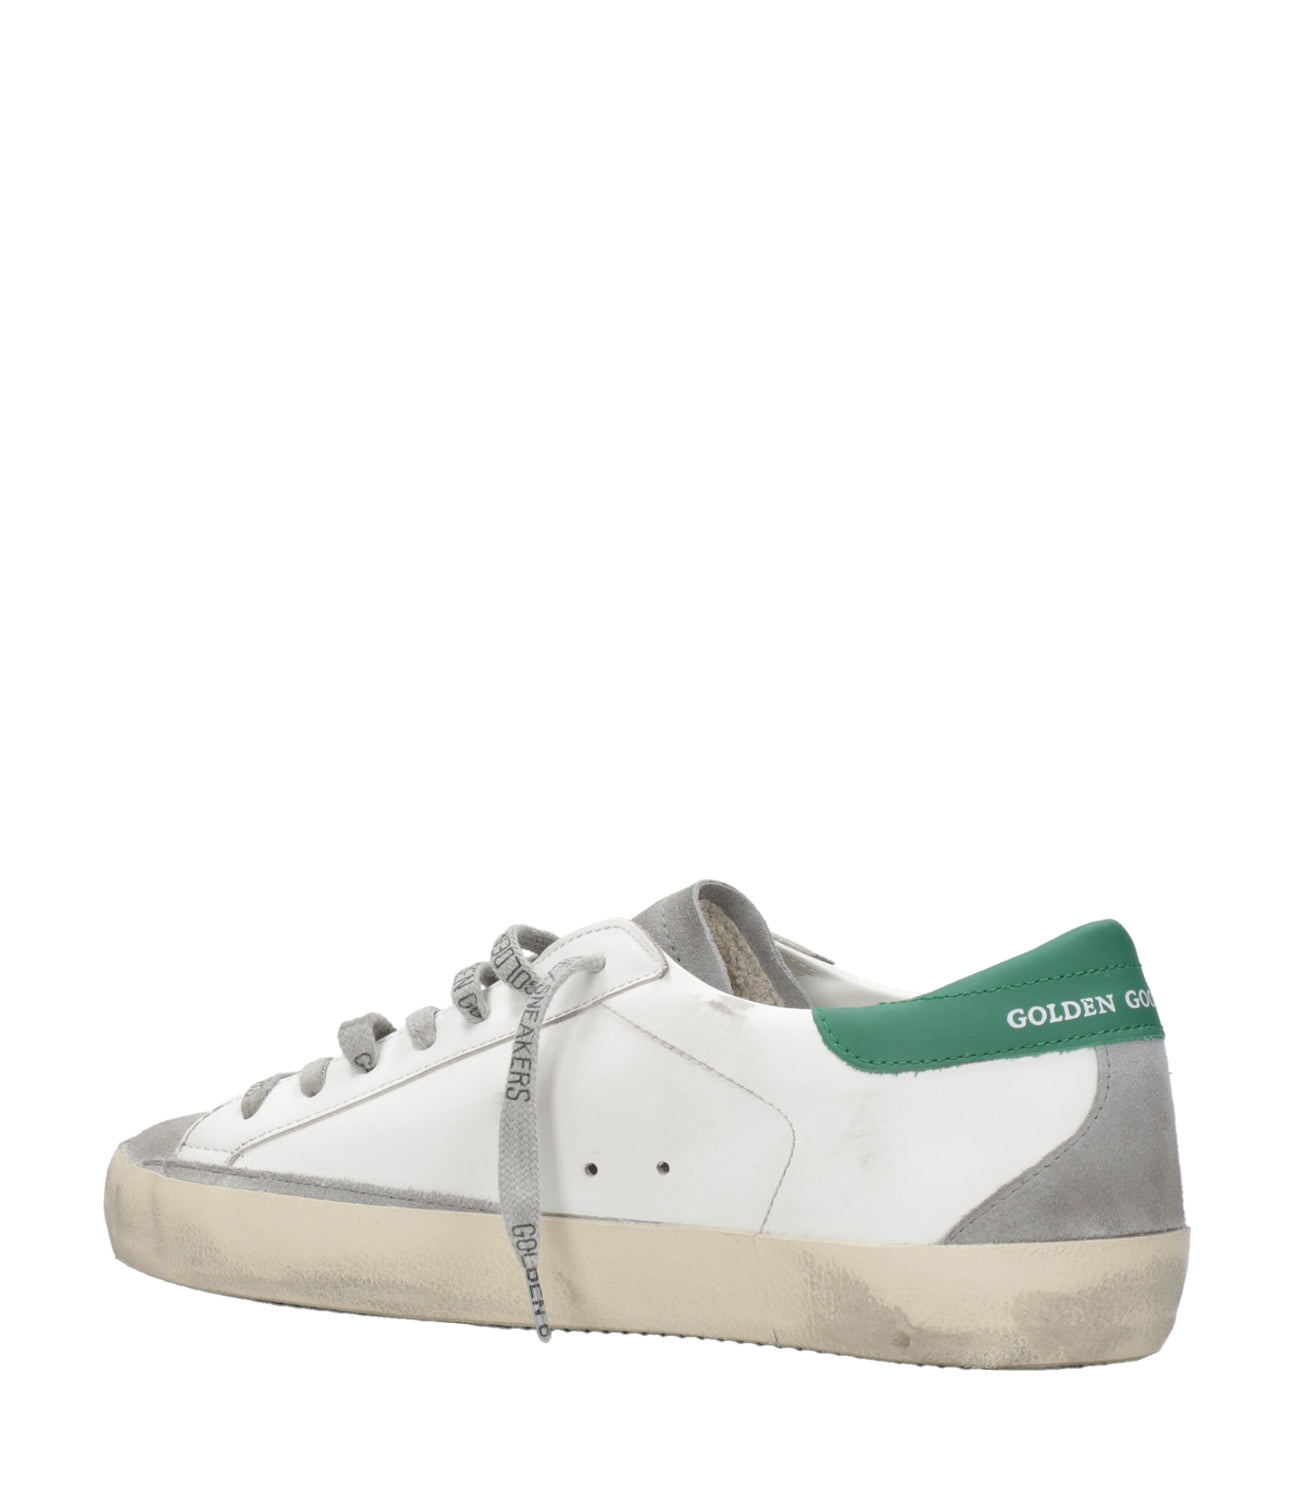 Golden Goose | Sneakers Super-Star White and Green